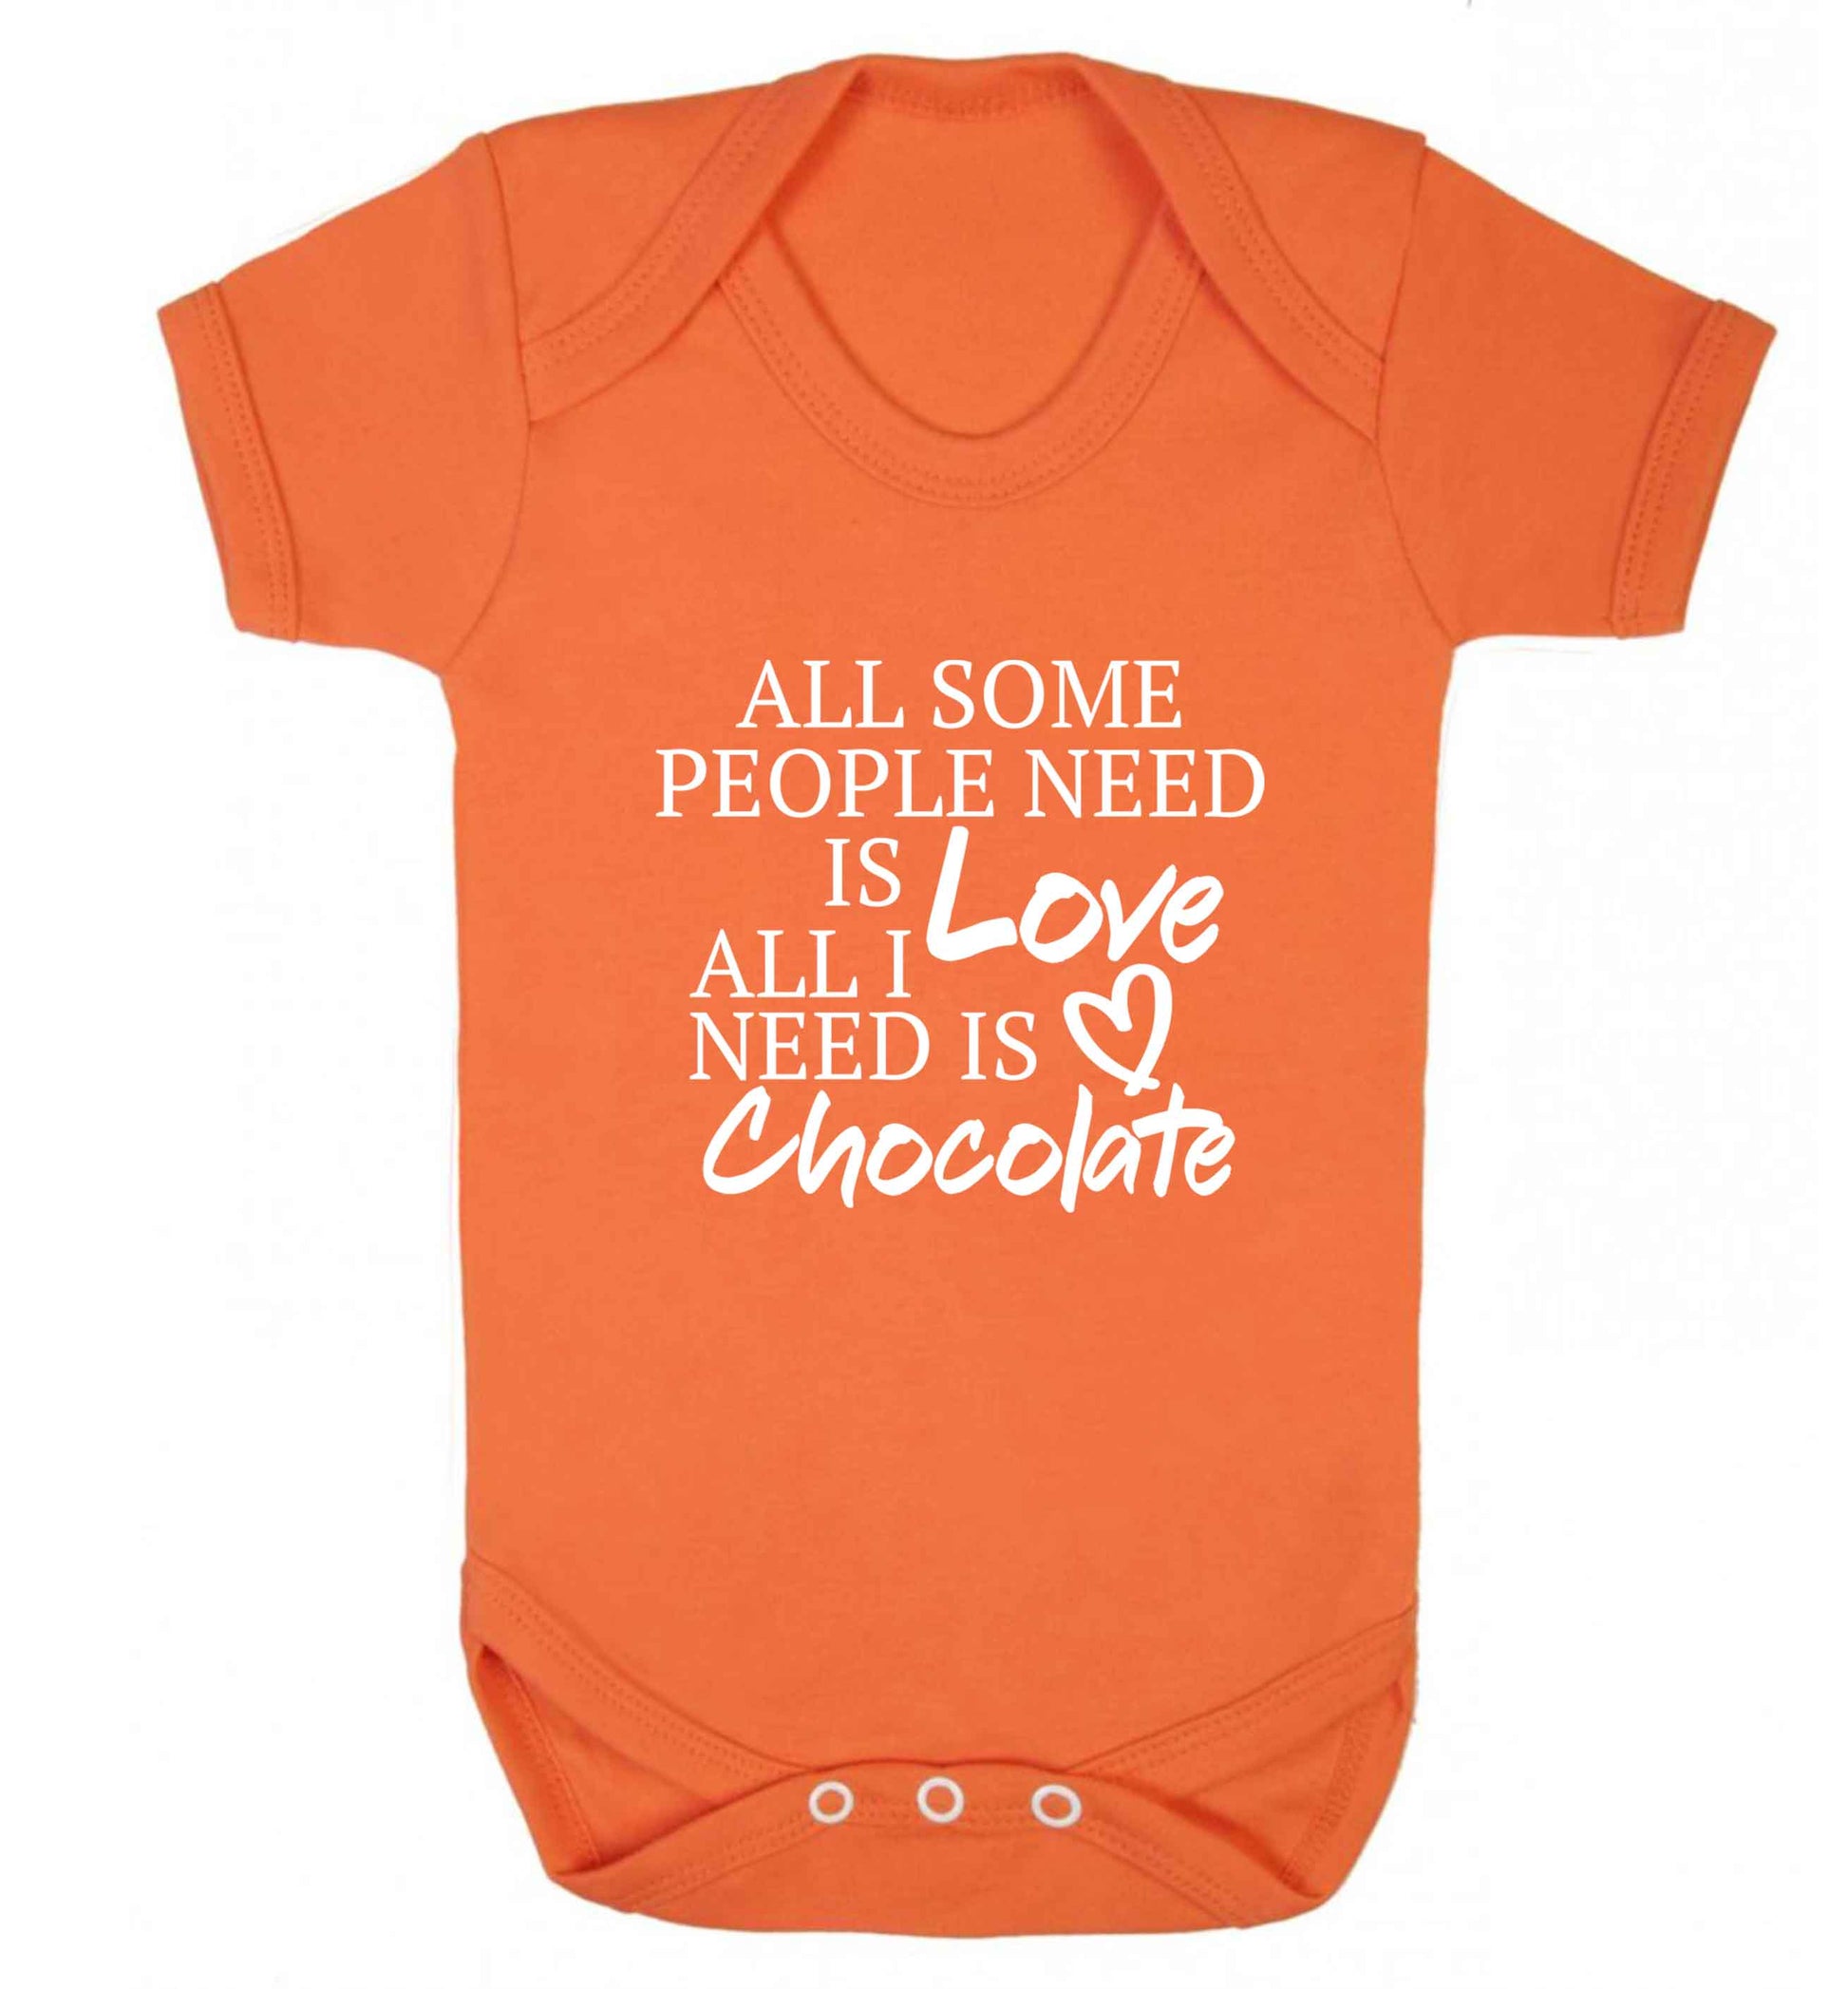 All some people need is love all I need is chocolate baby vest orange 18-24 months